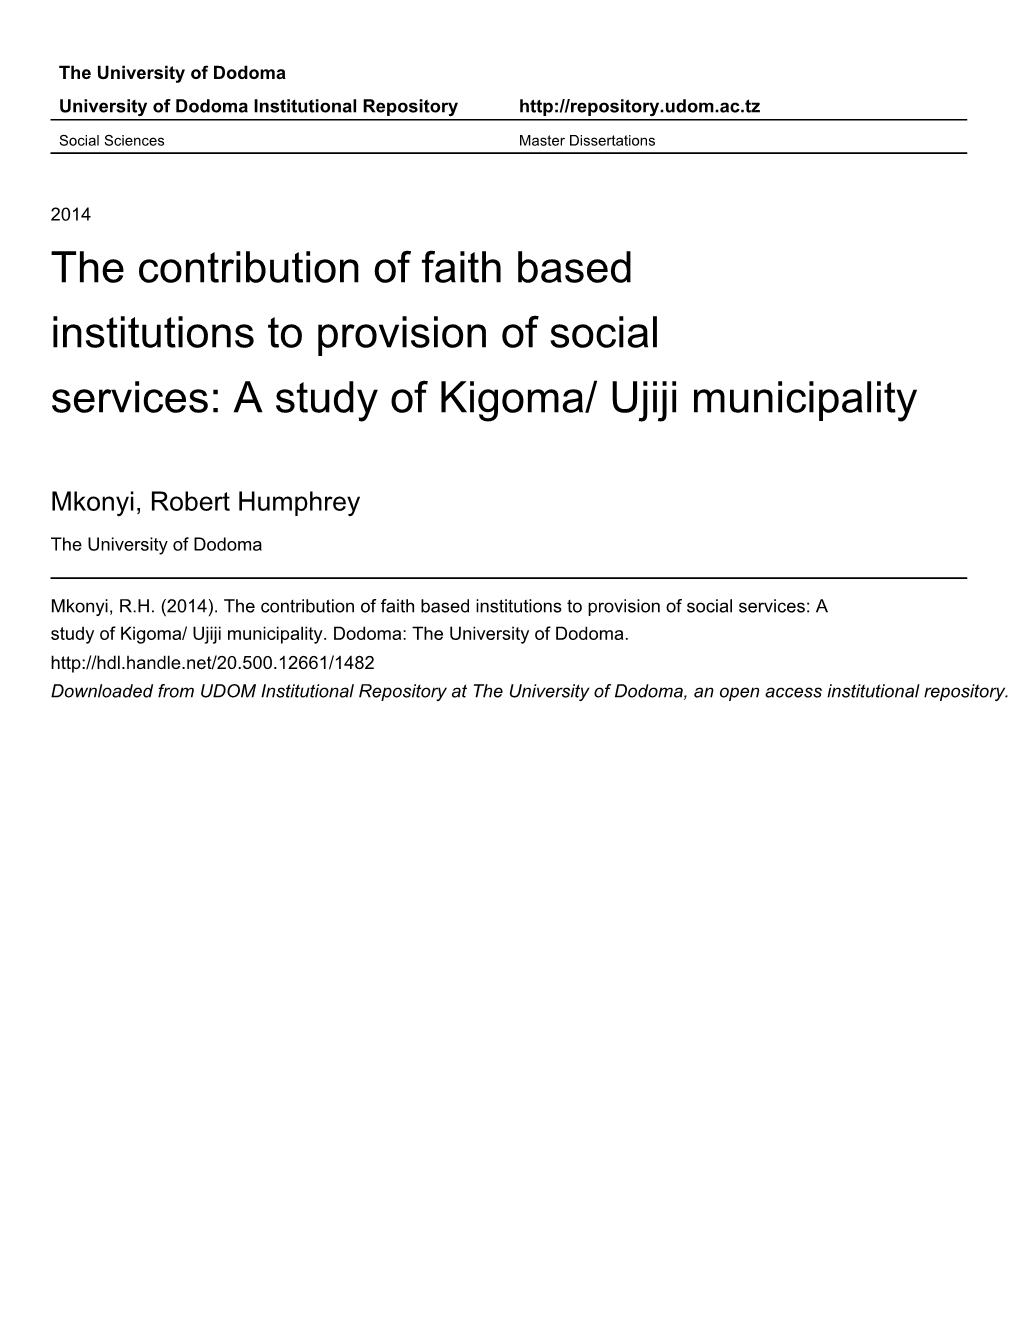 The Contribution of Faith Based Institutions to Provision of Social Services: a Study of Kigoma/ Ujiji Municipality